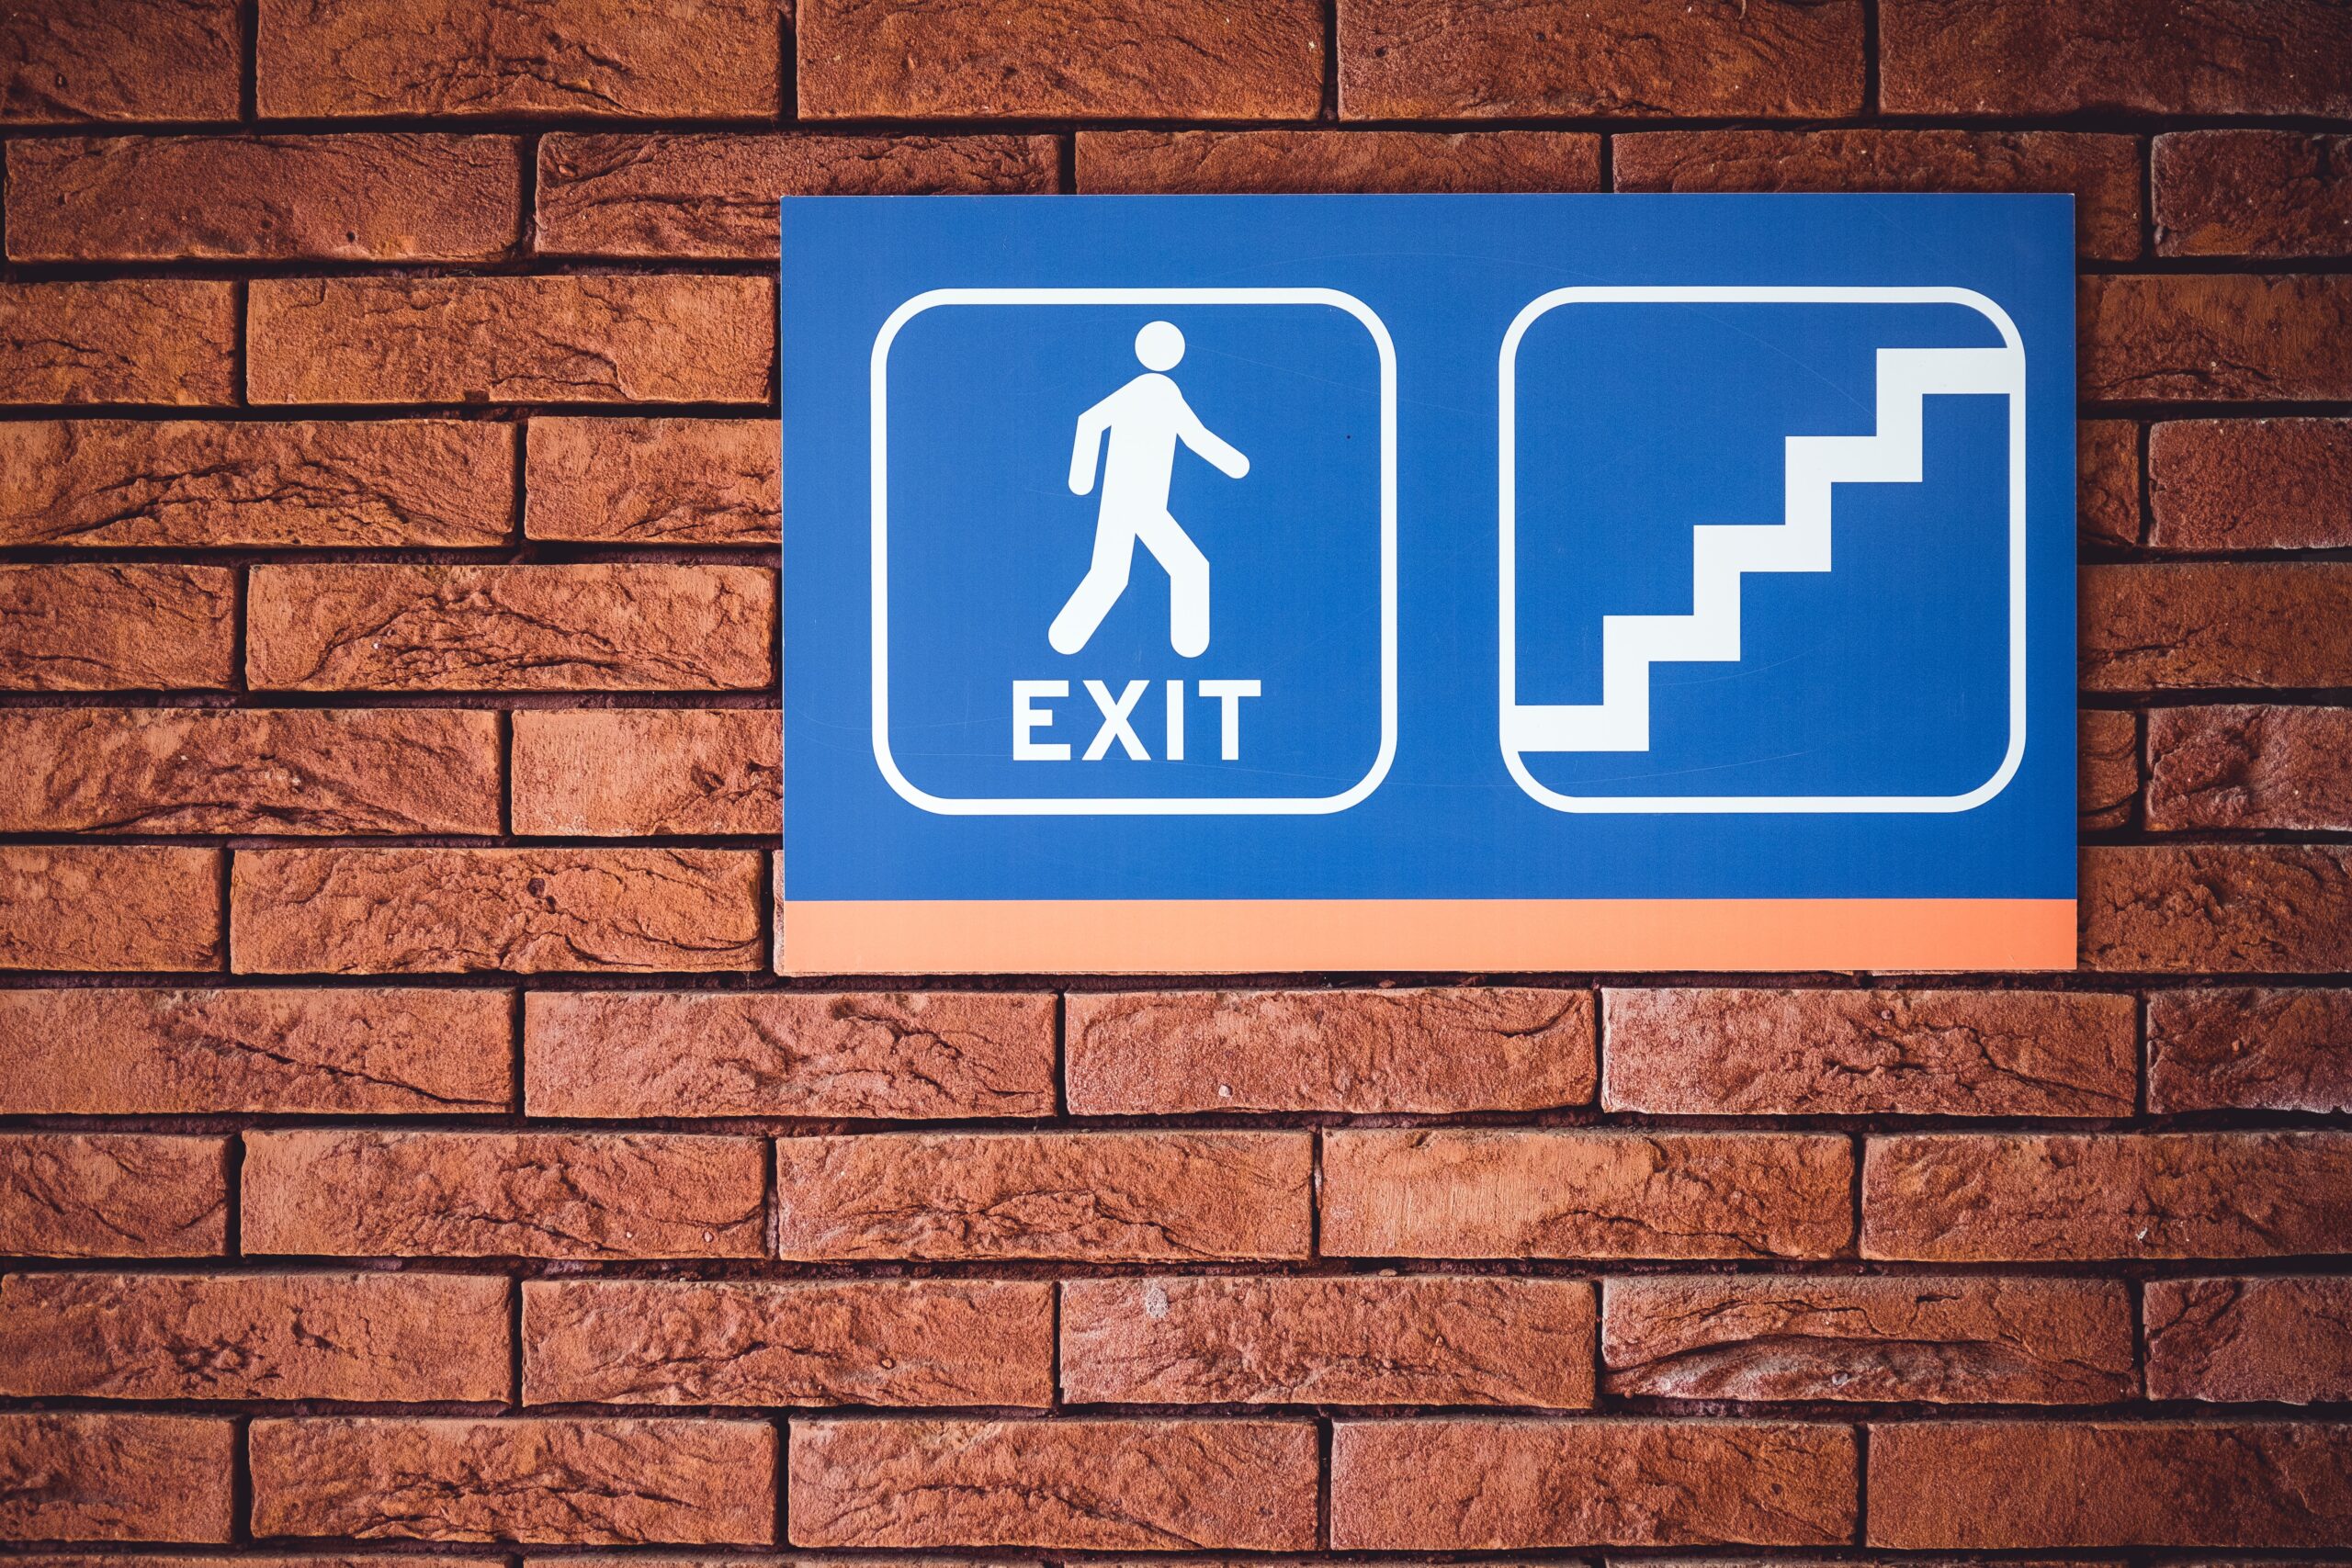 Fire exit sign on wall | Fire Safety in Workplace | Franklins Training Services